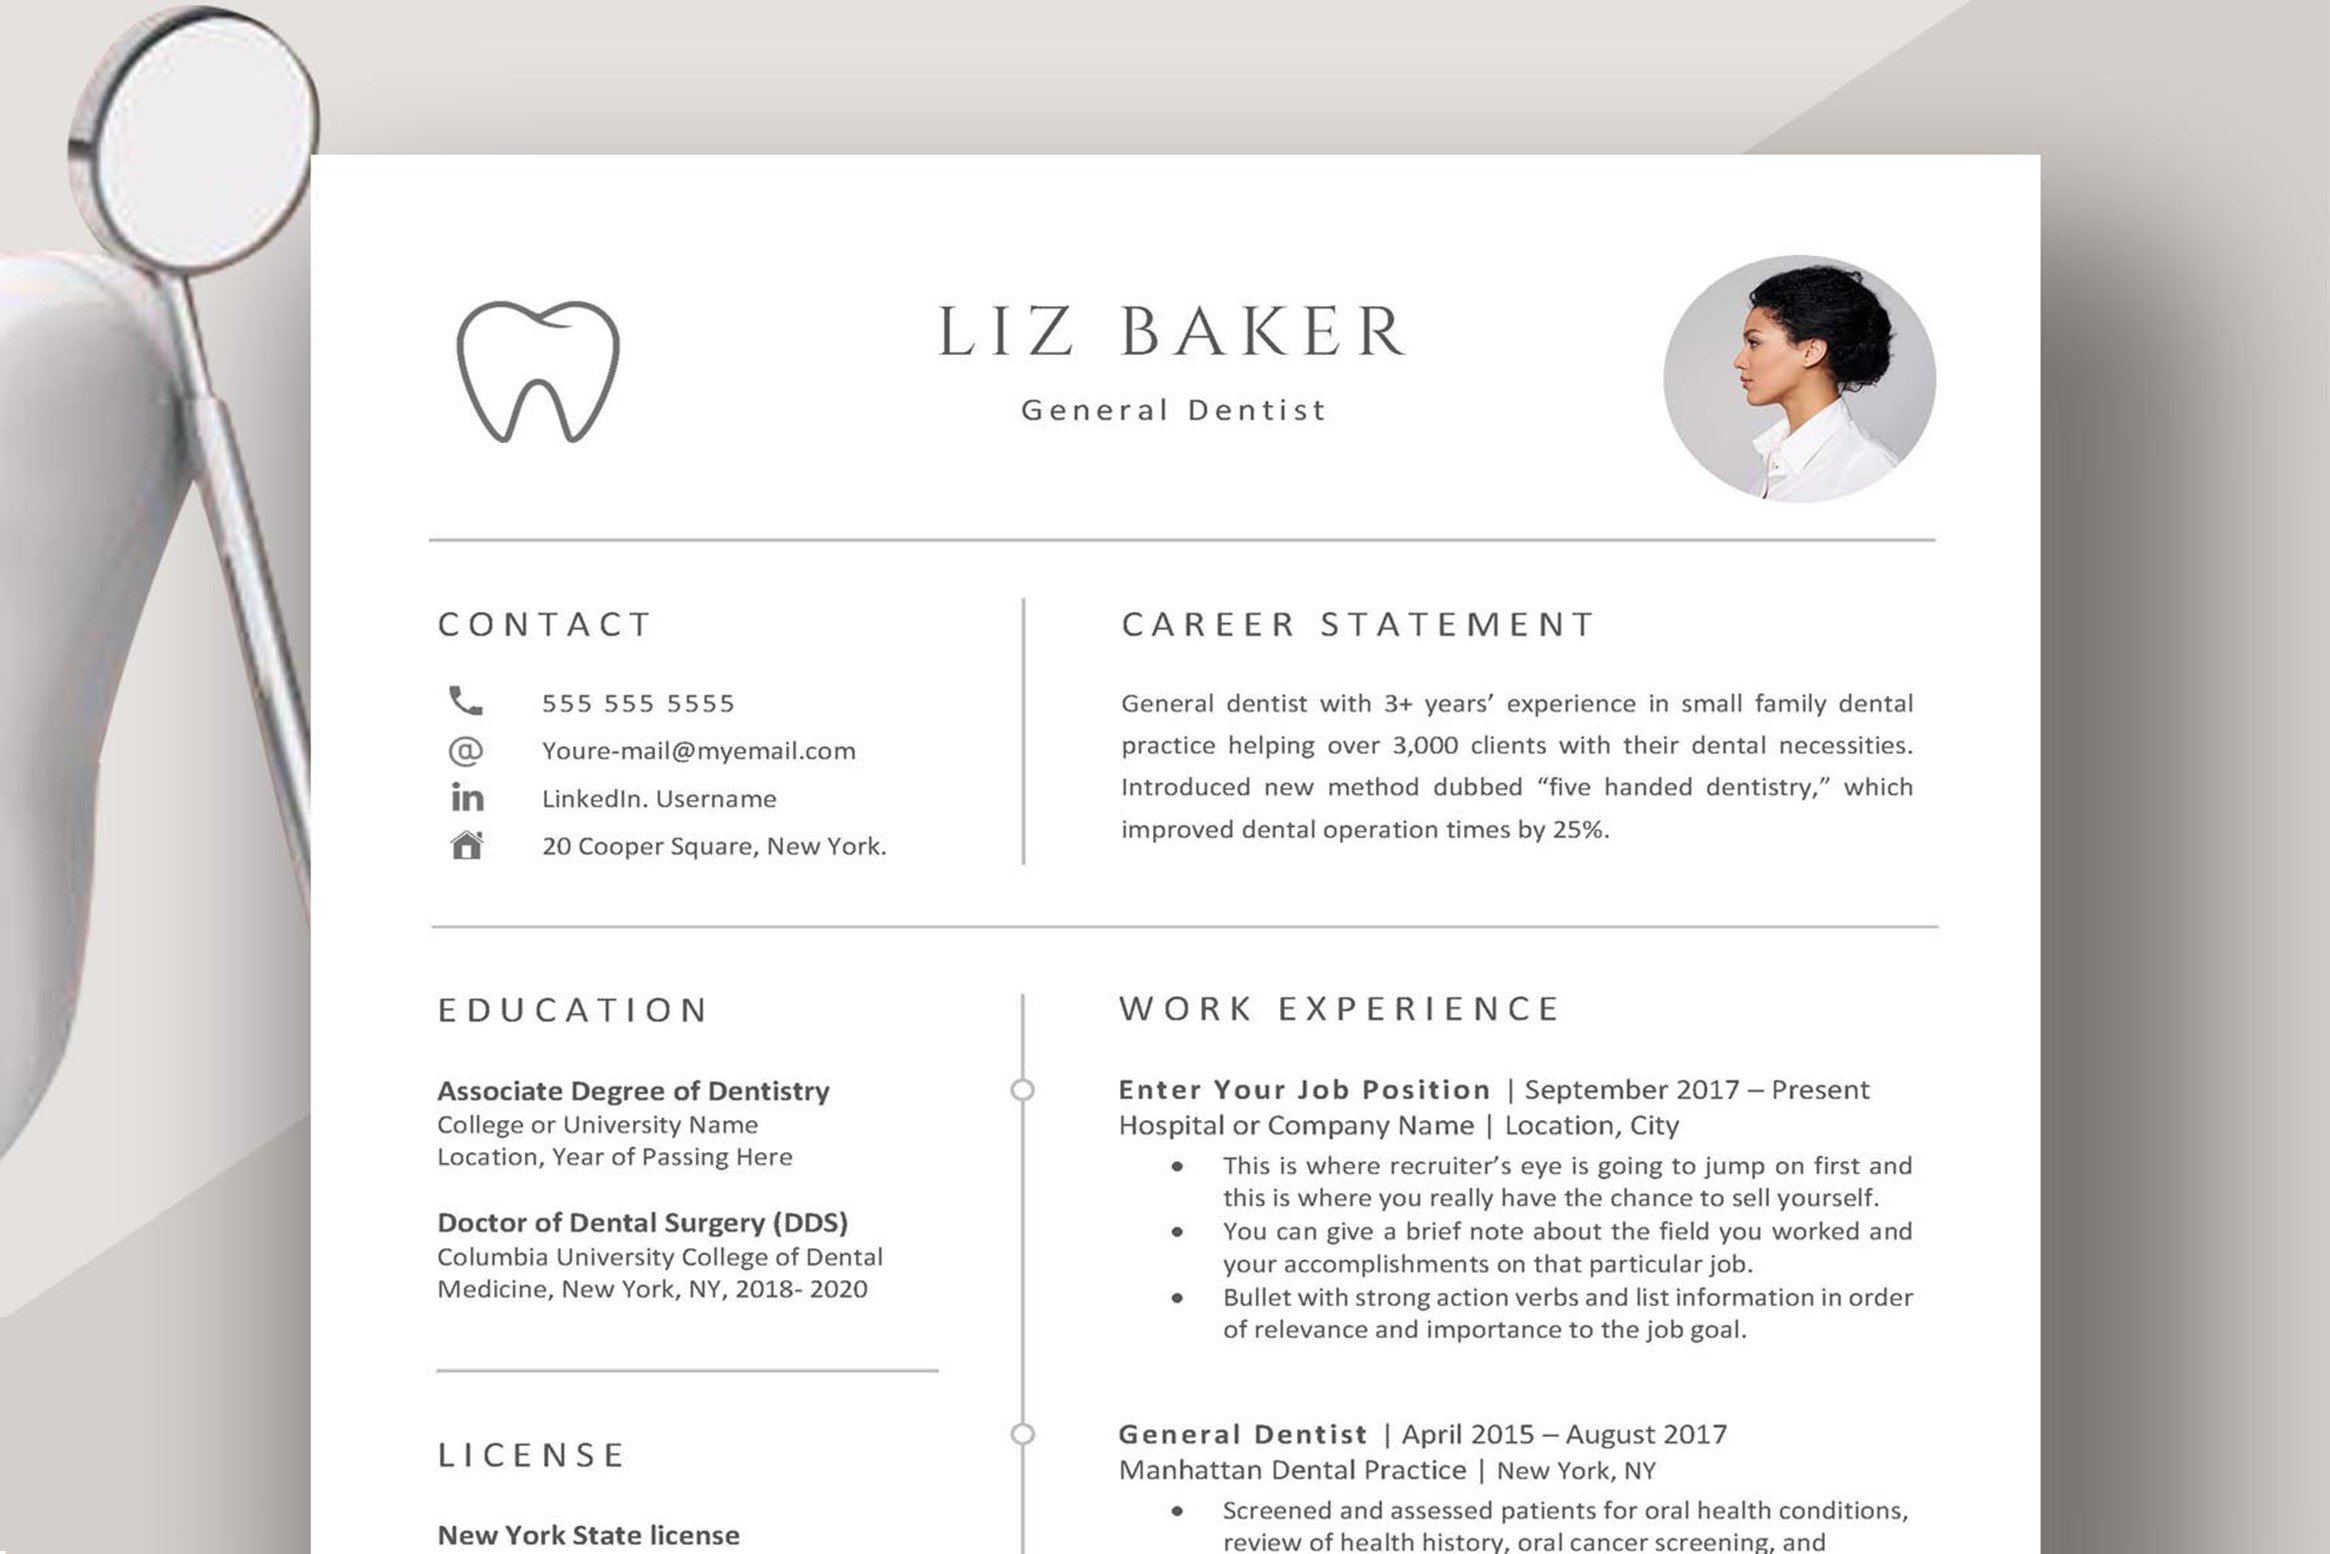 Professional resume template for a dentist.